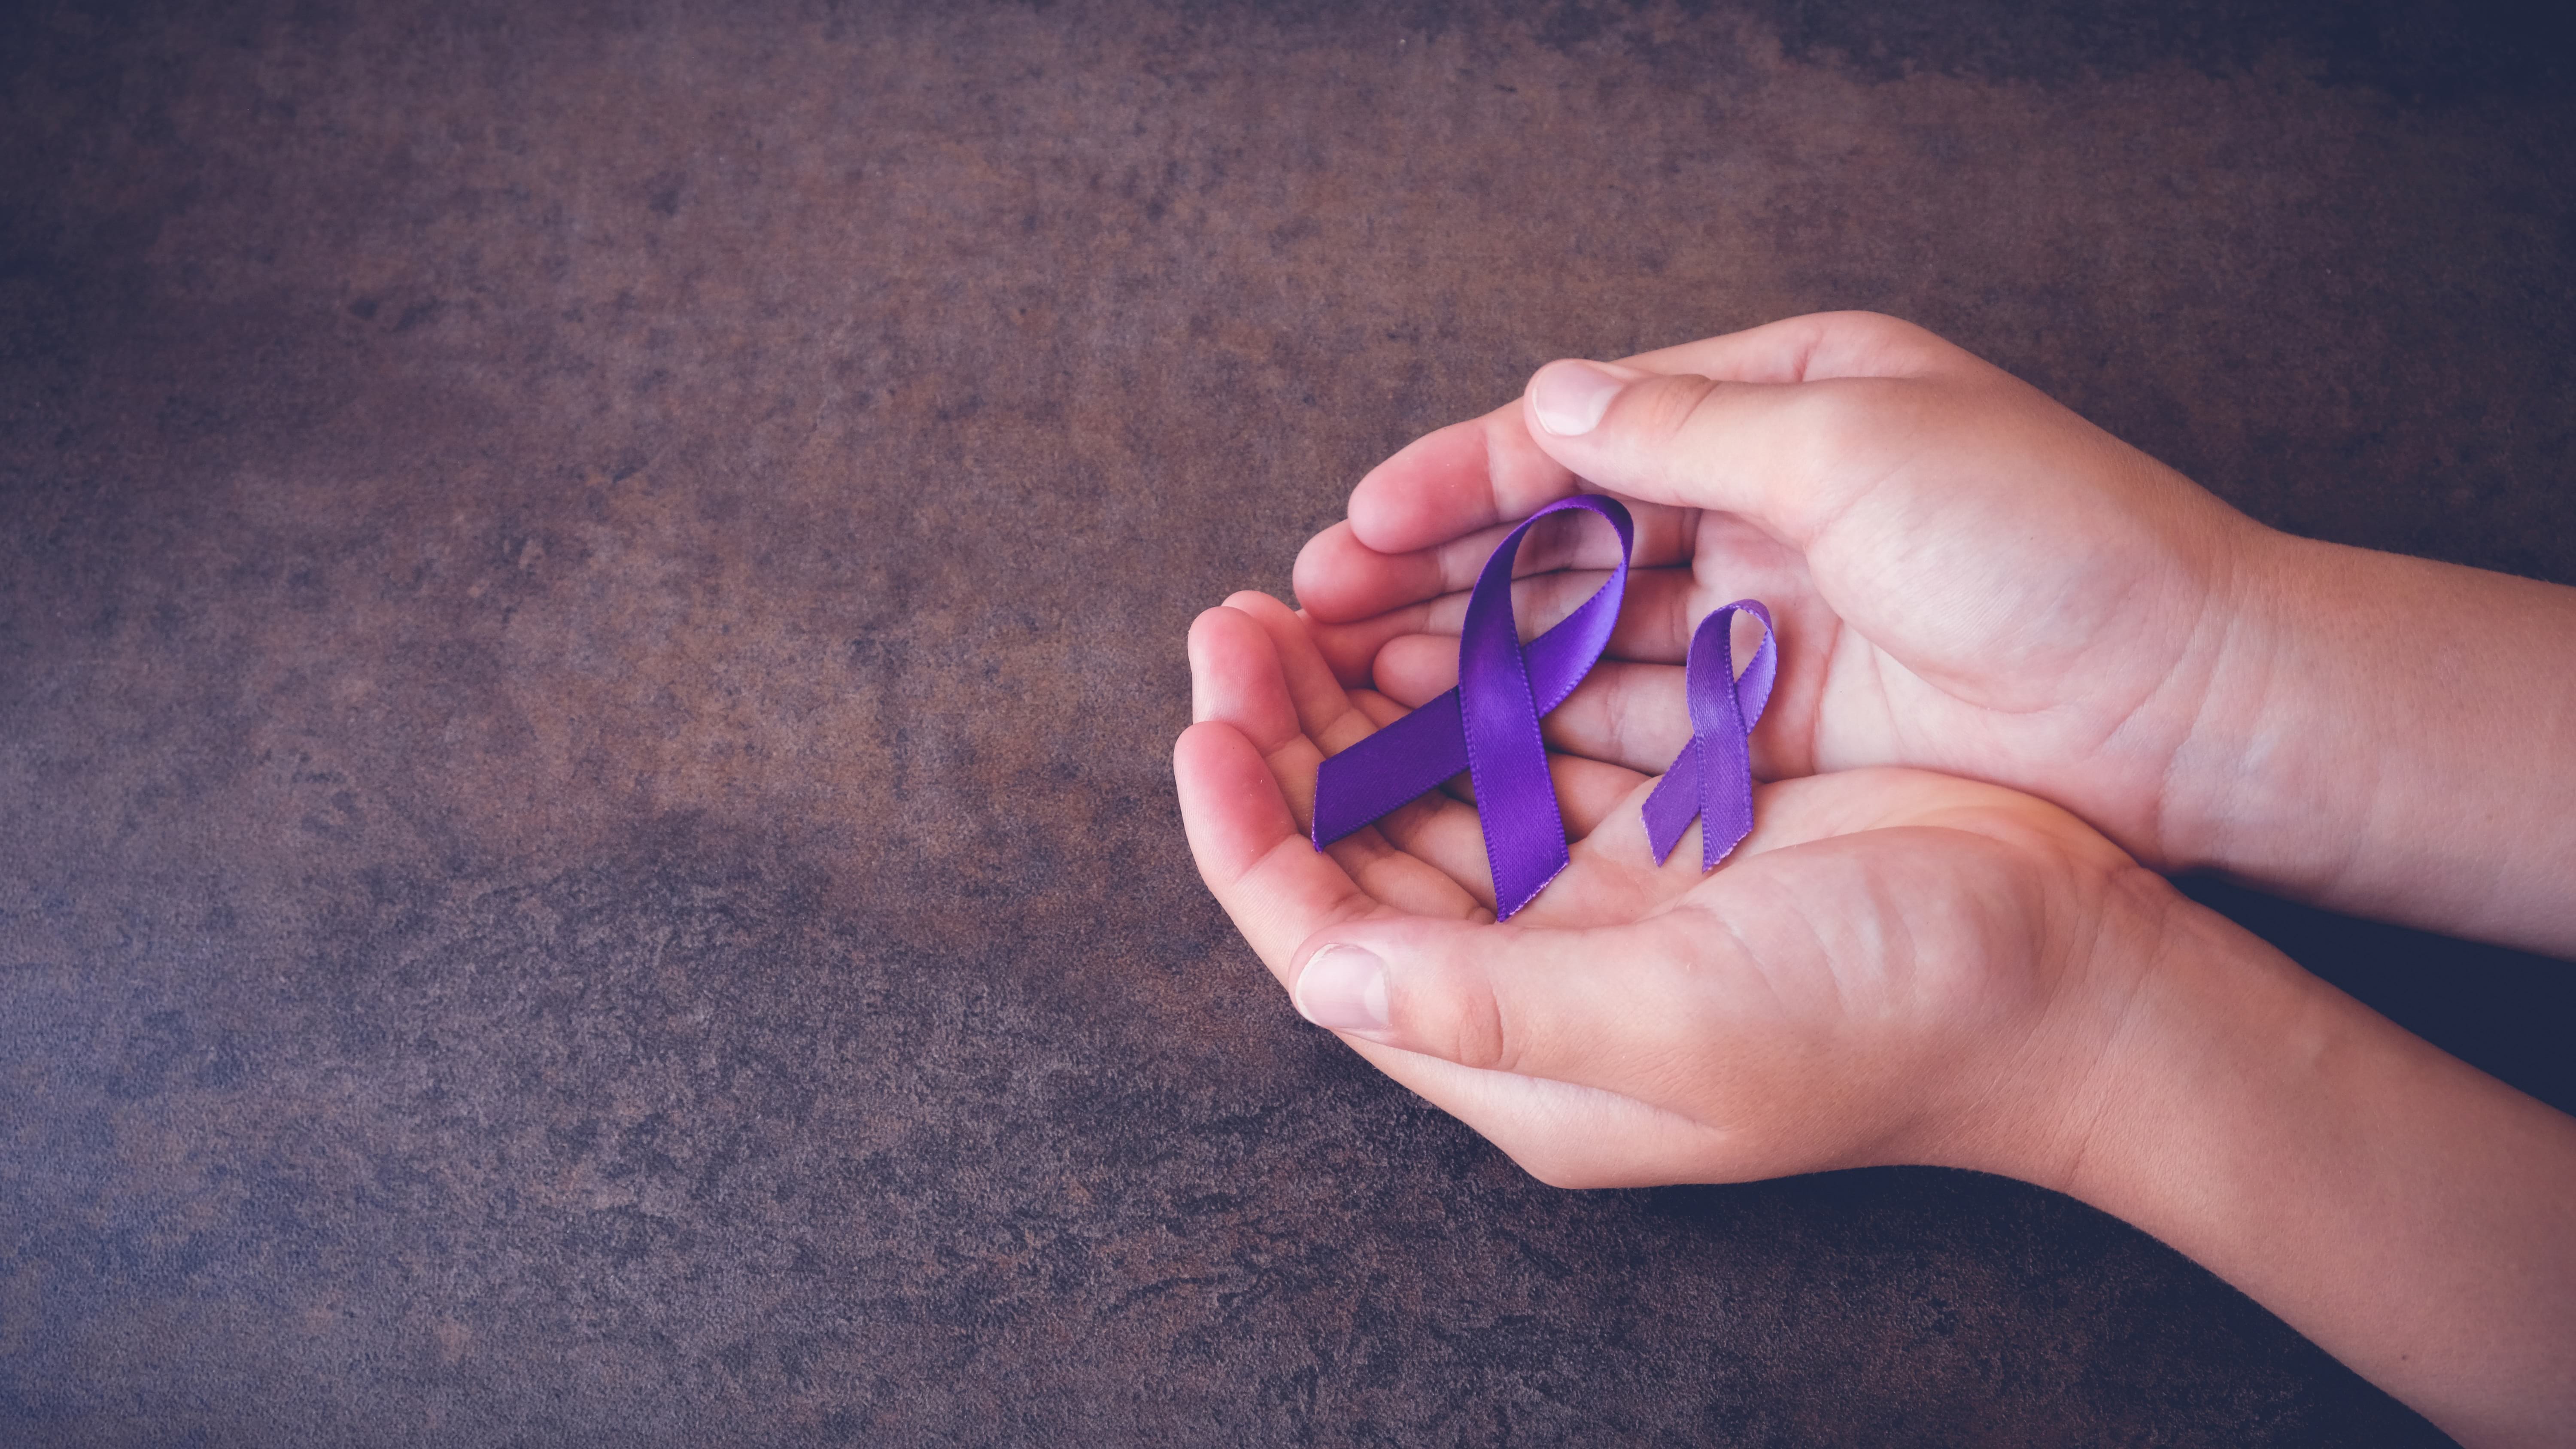 Hands holding purple ribbons